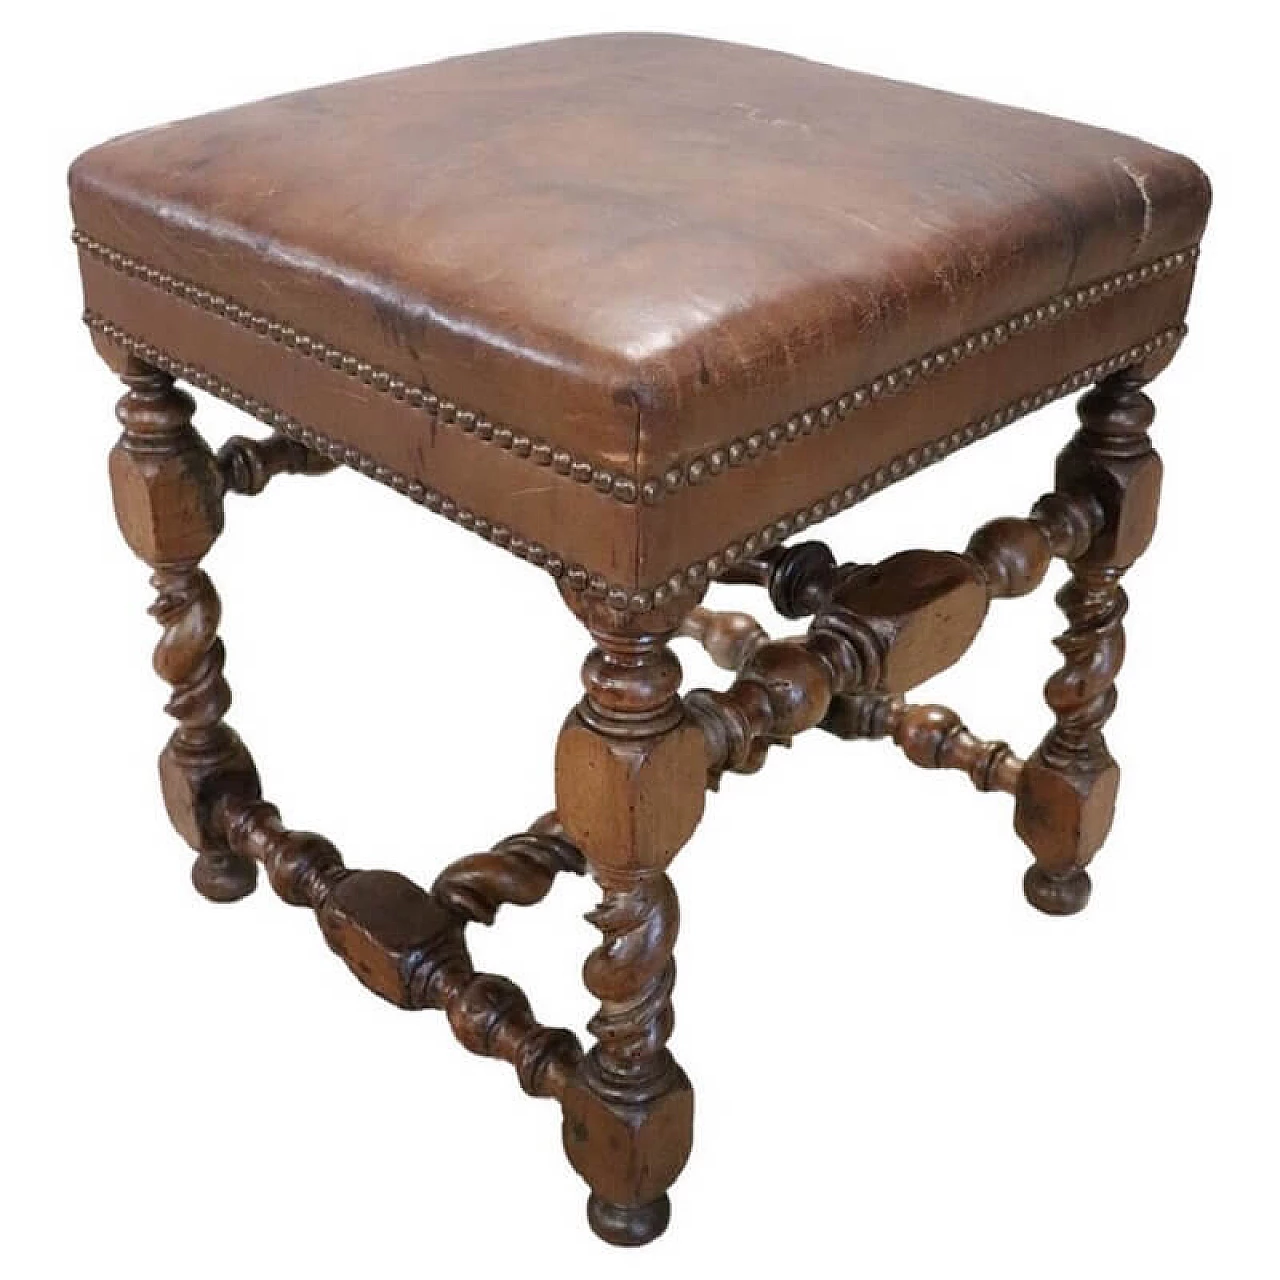 Walnut stool with leather seat, 18th century 1